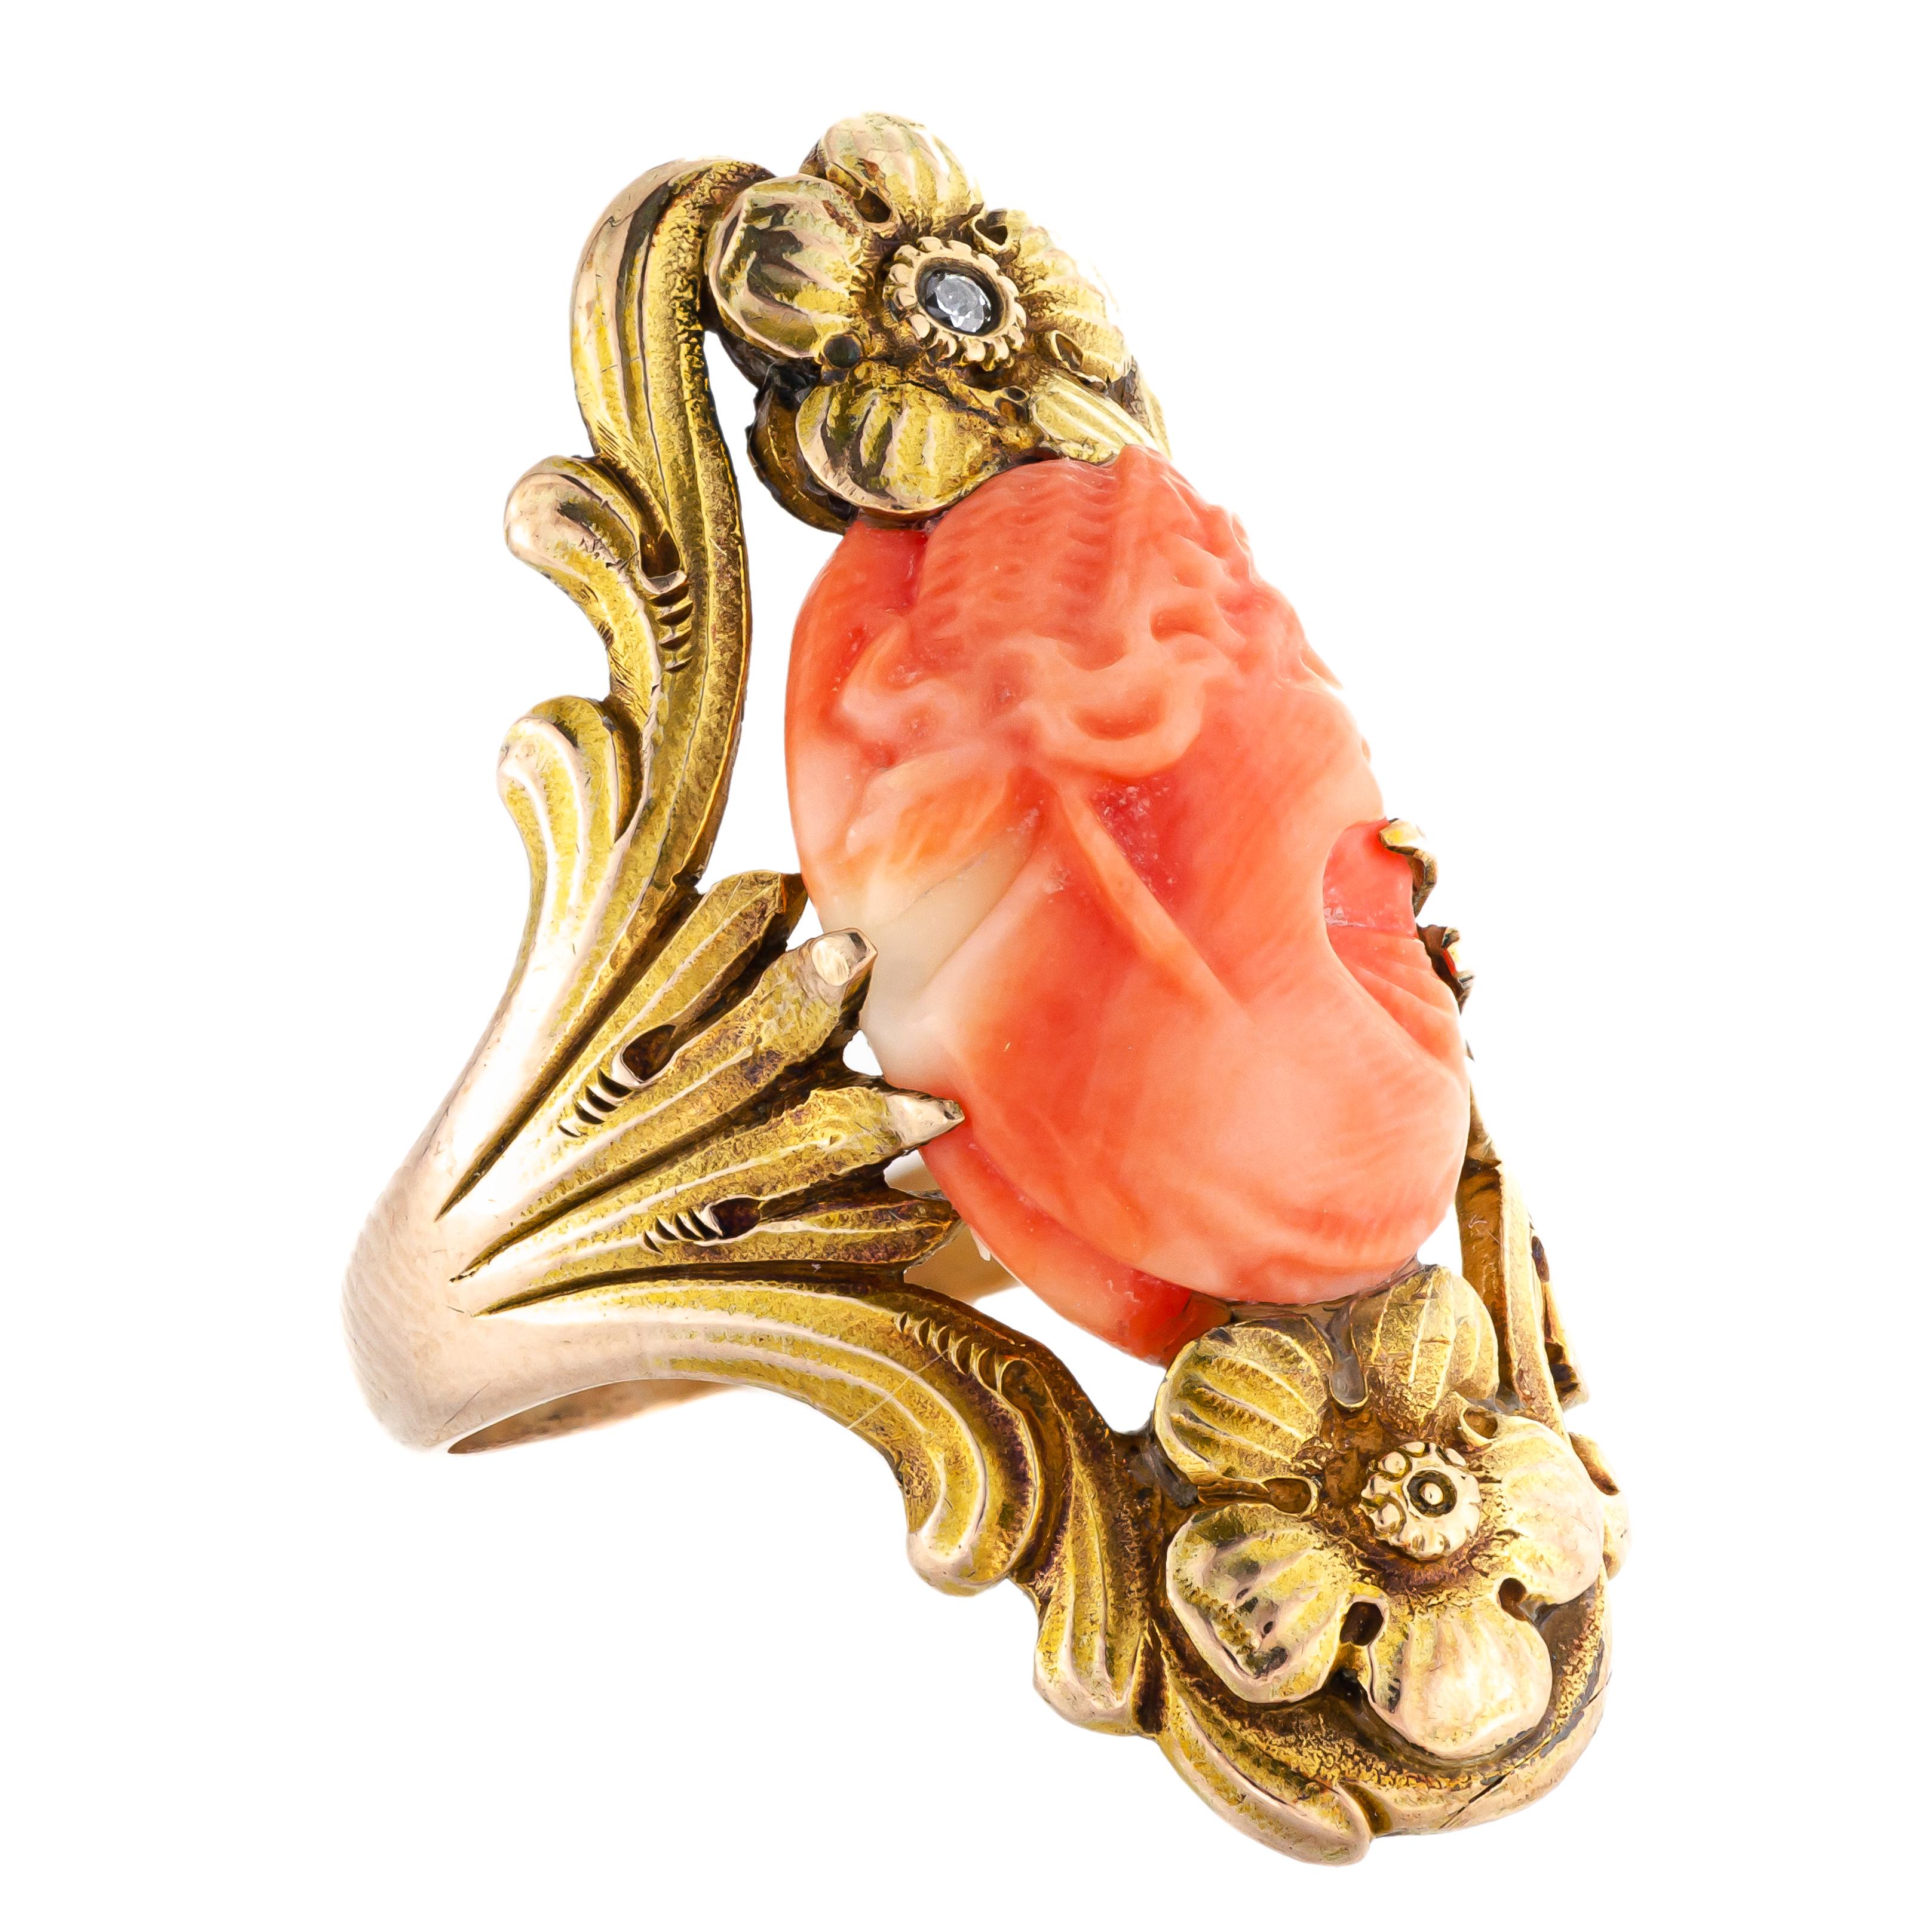 This is a magnificent Art Nouveau coral cameo from 1905 that is sure to captivate anyone who lays eyes on it. The beautifully carved bust of a woman in profile is elegantly set in an elaborate 14kt yellow gold ring mount, which features a stunning